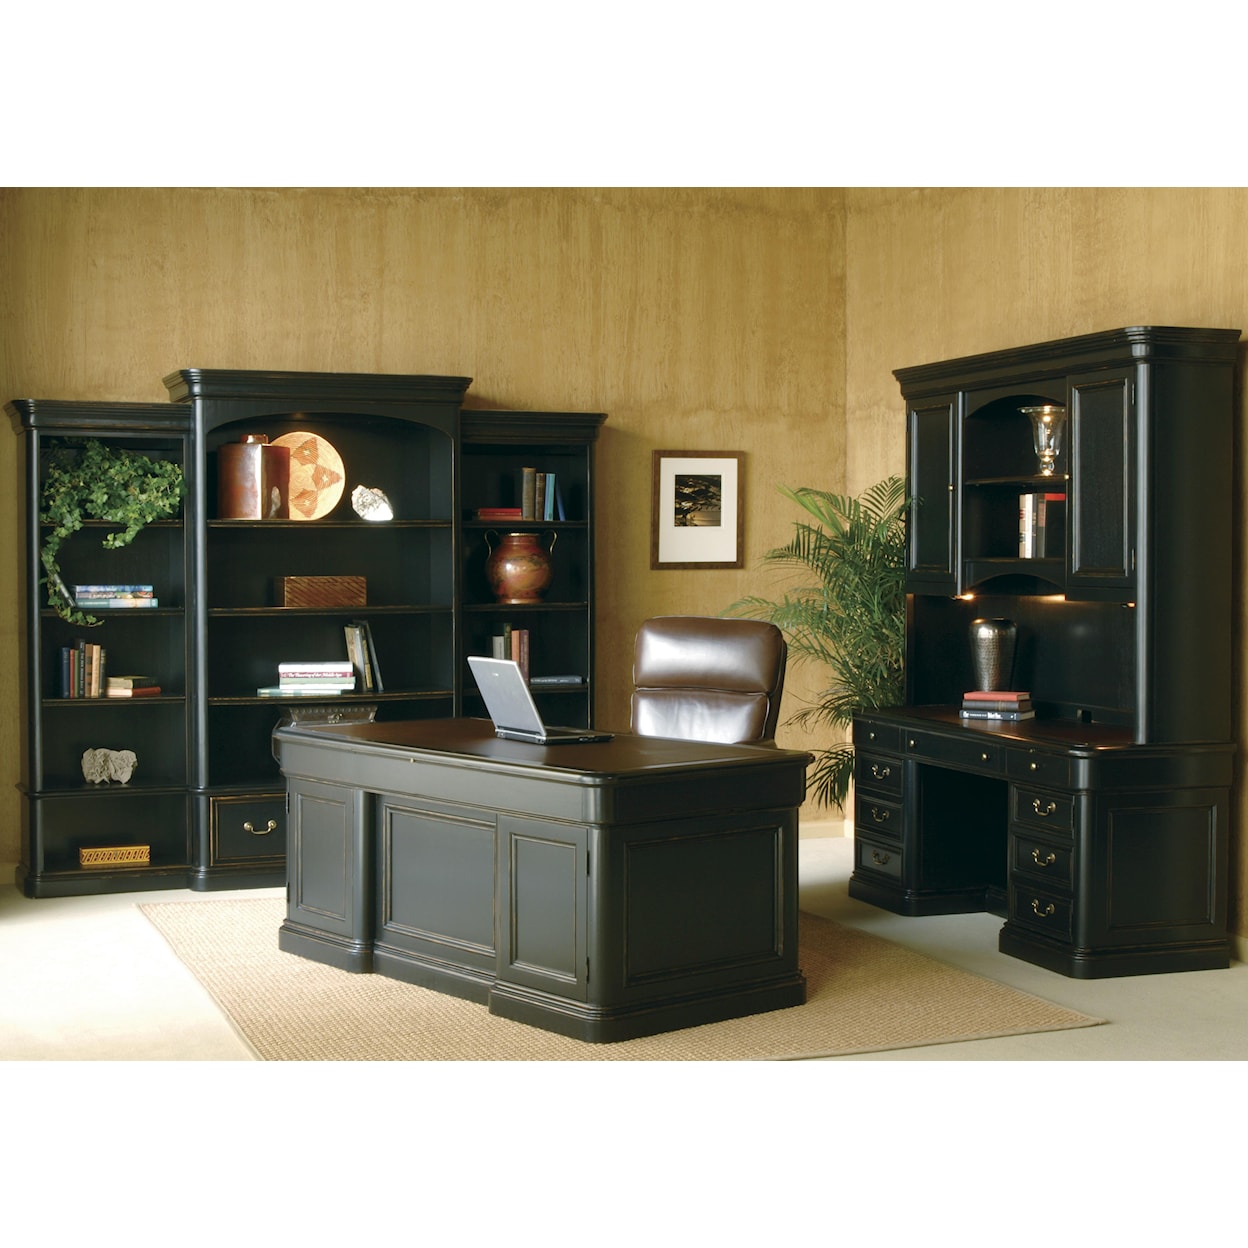 Hekman 7-9100 Executive Credenza with Hutch